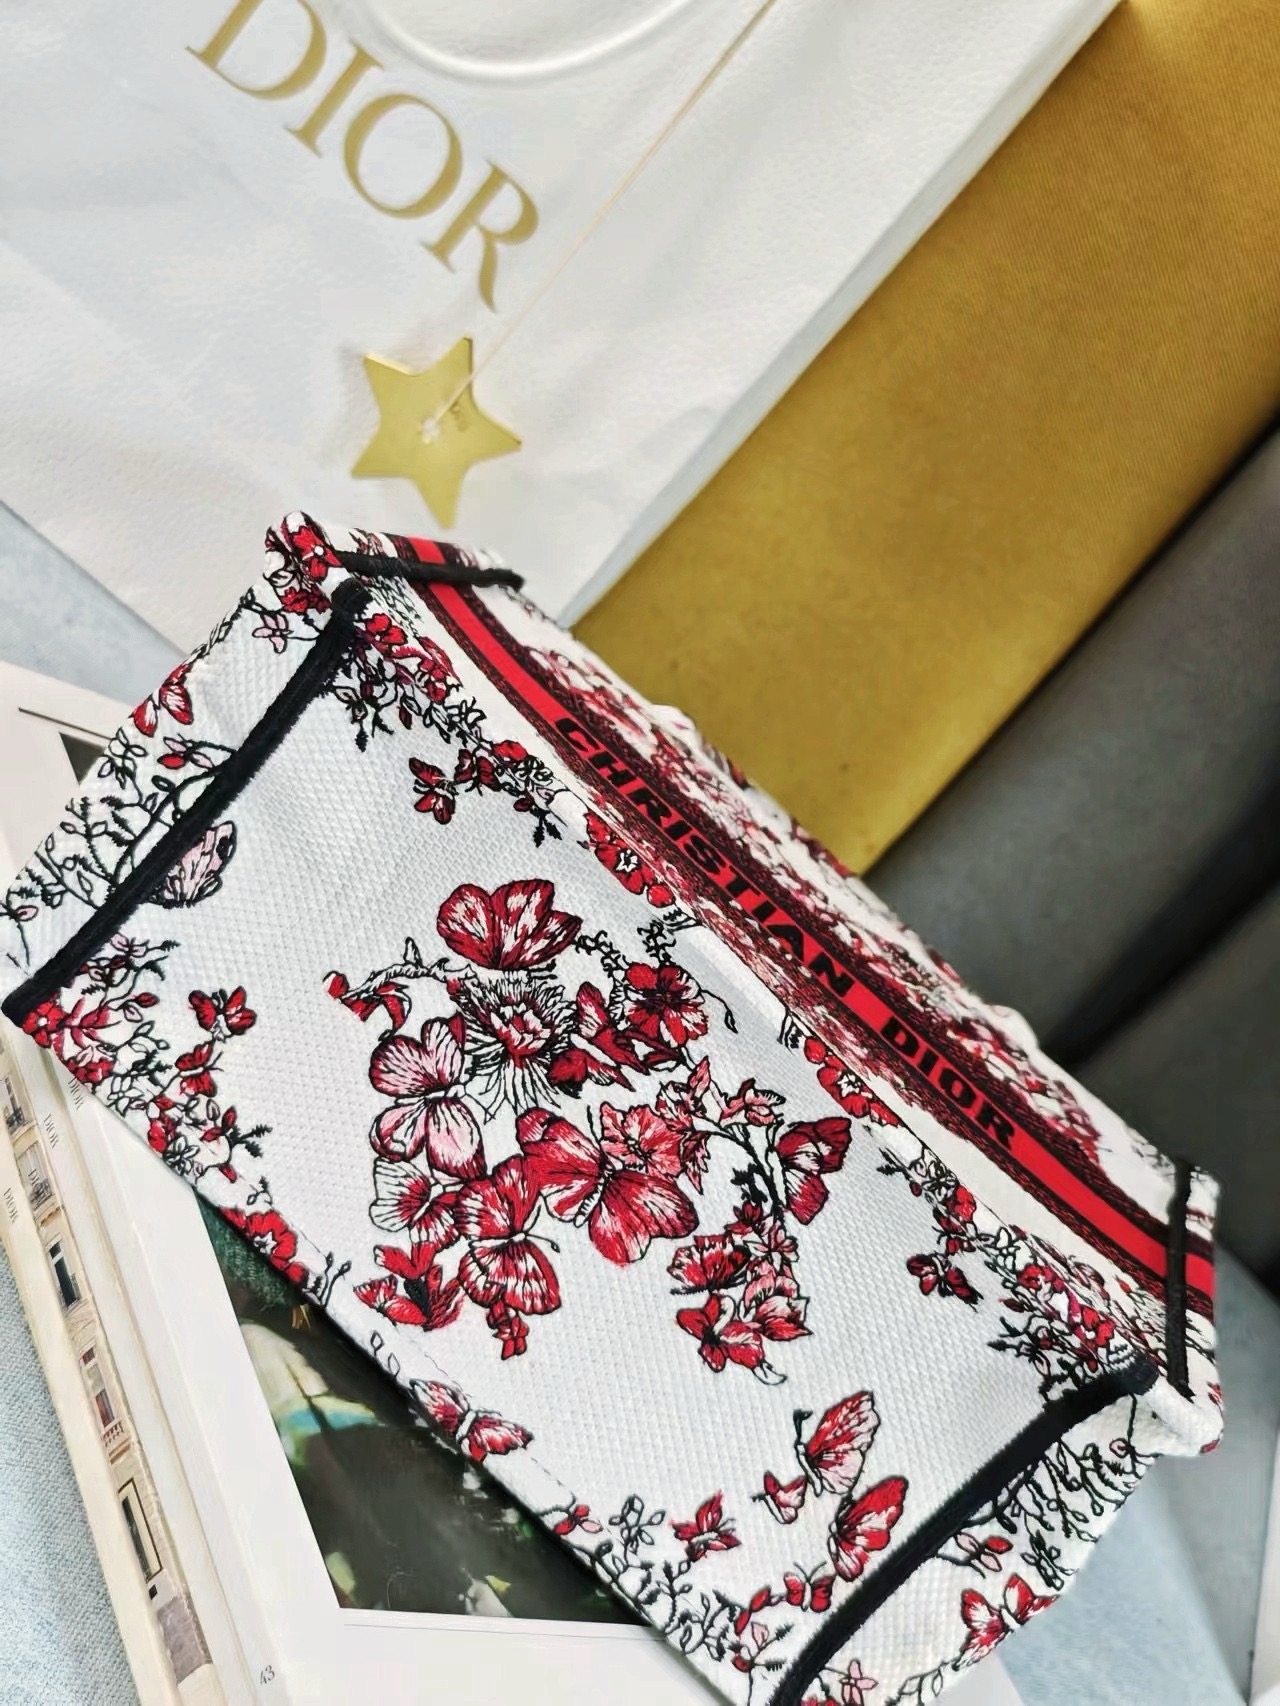 SMALL DIOR BOOK TOTEWhite and Red Le Coeur des Papillons Embroidery M1296ZRf